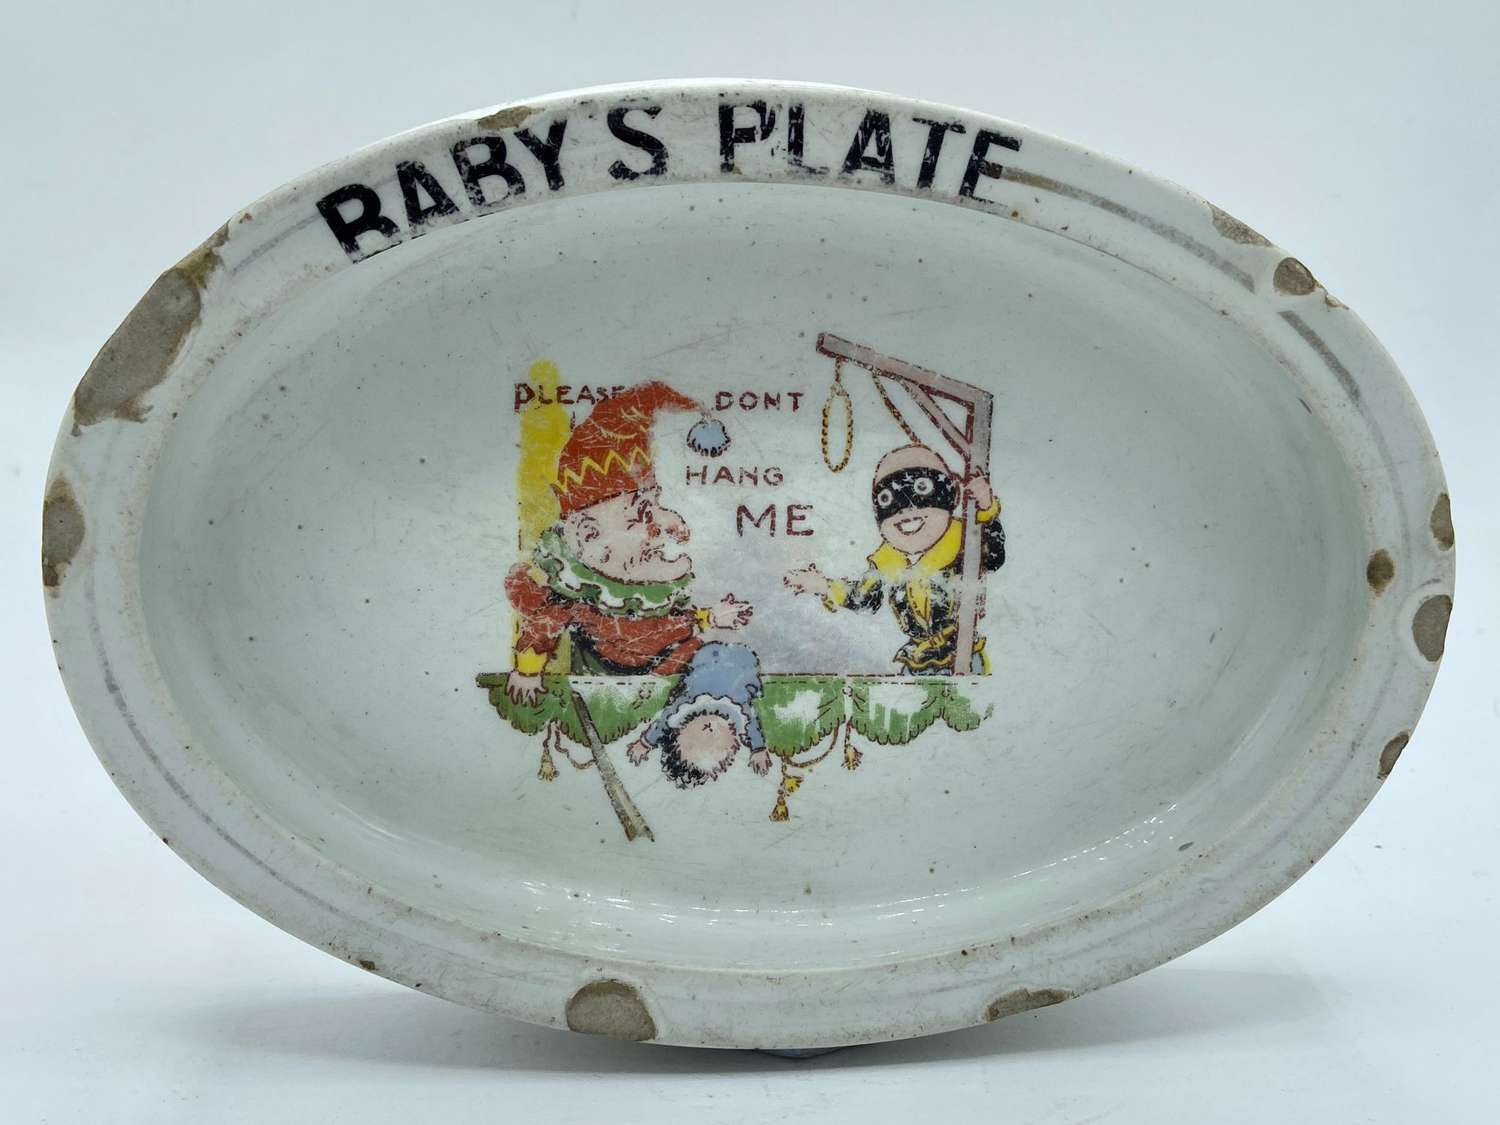 Edwardian 1910 Ceramic Baby Plate “Please Don’t Hang Me” Punch & Judy